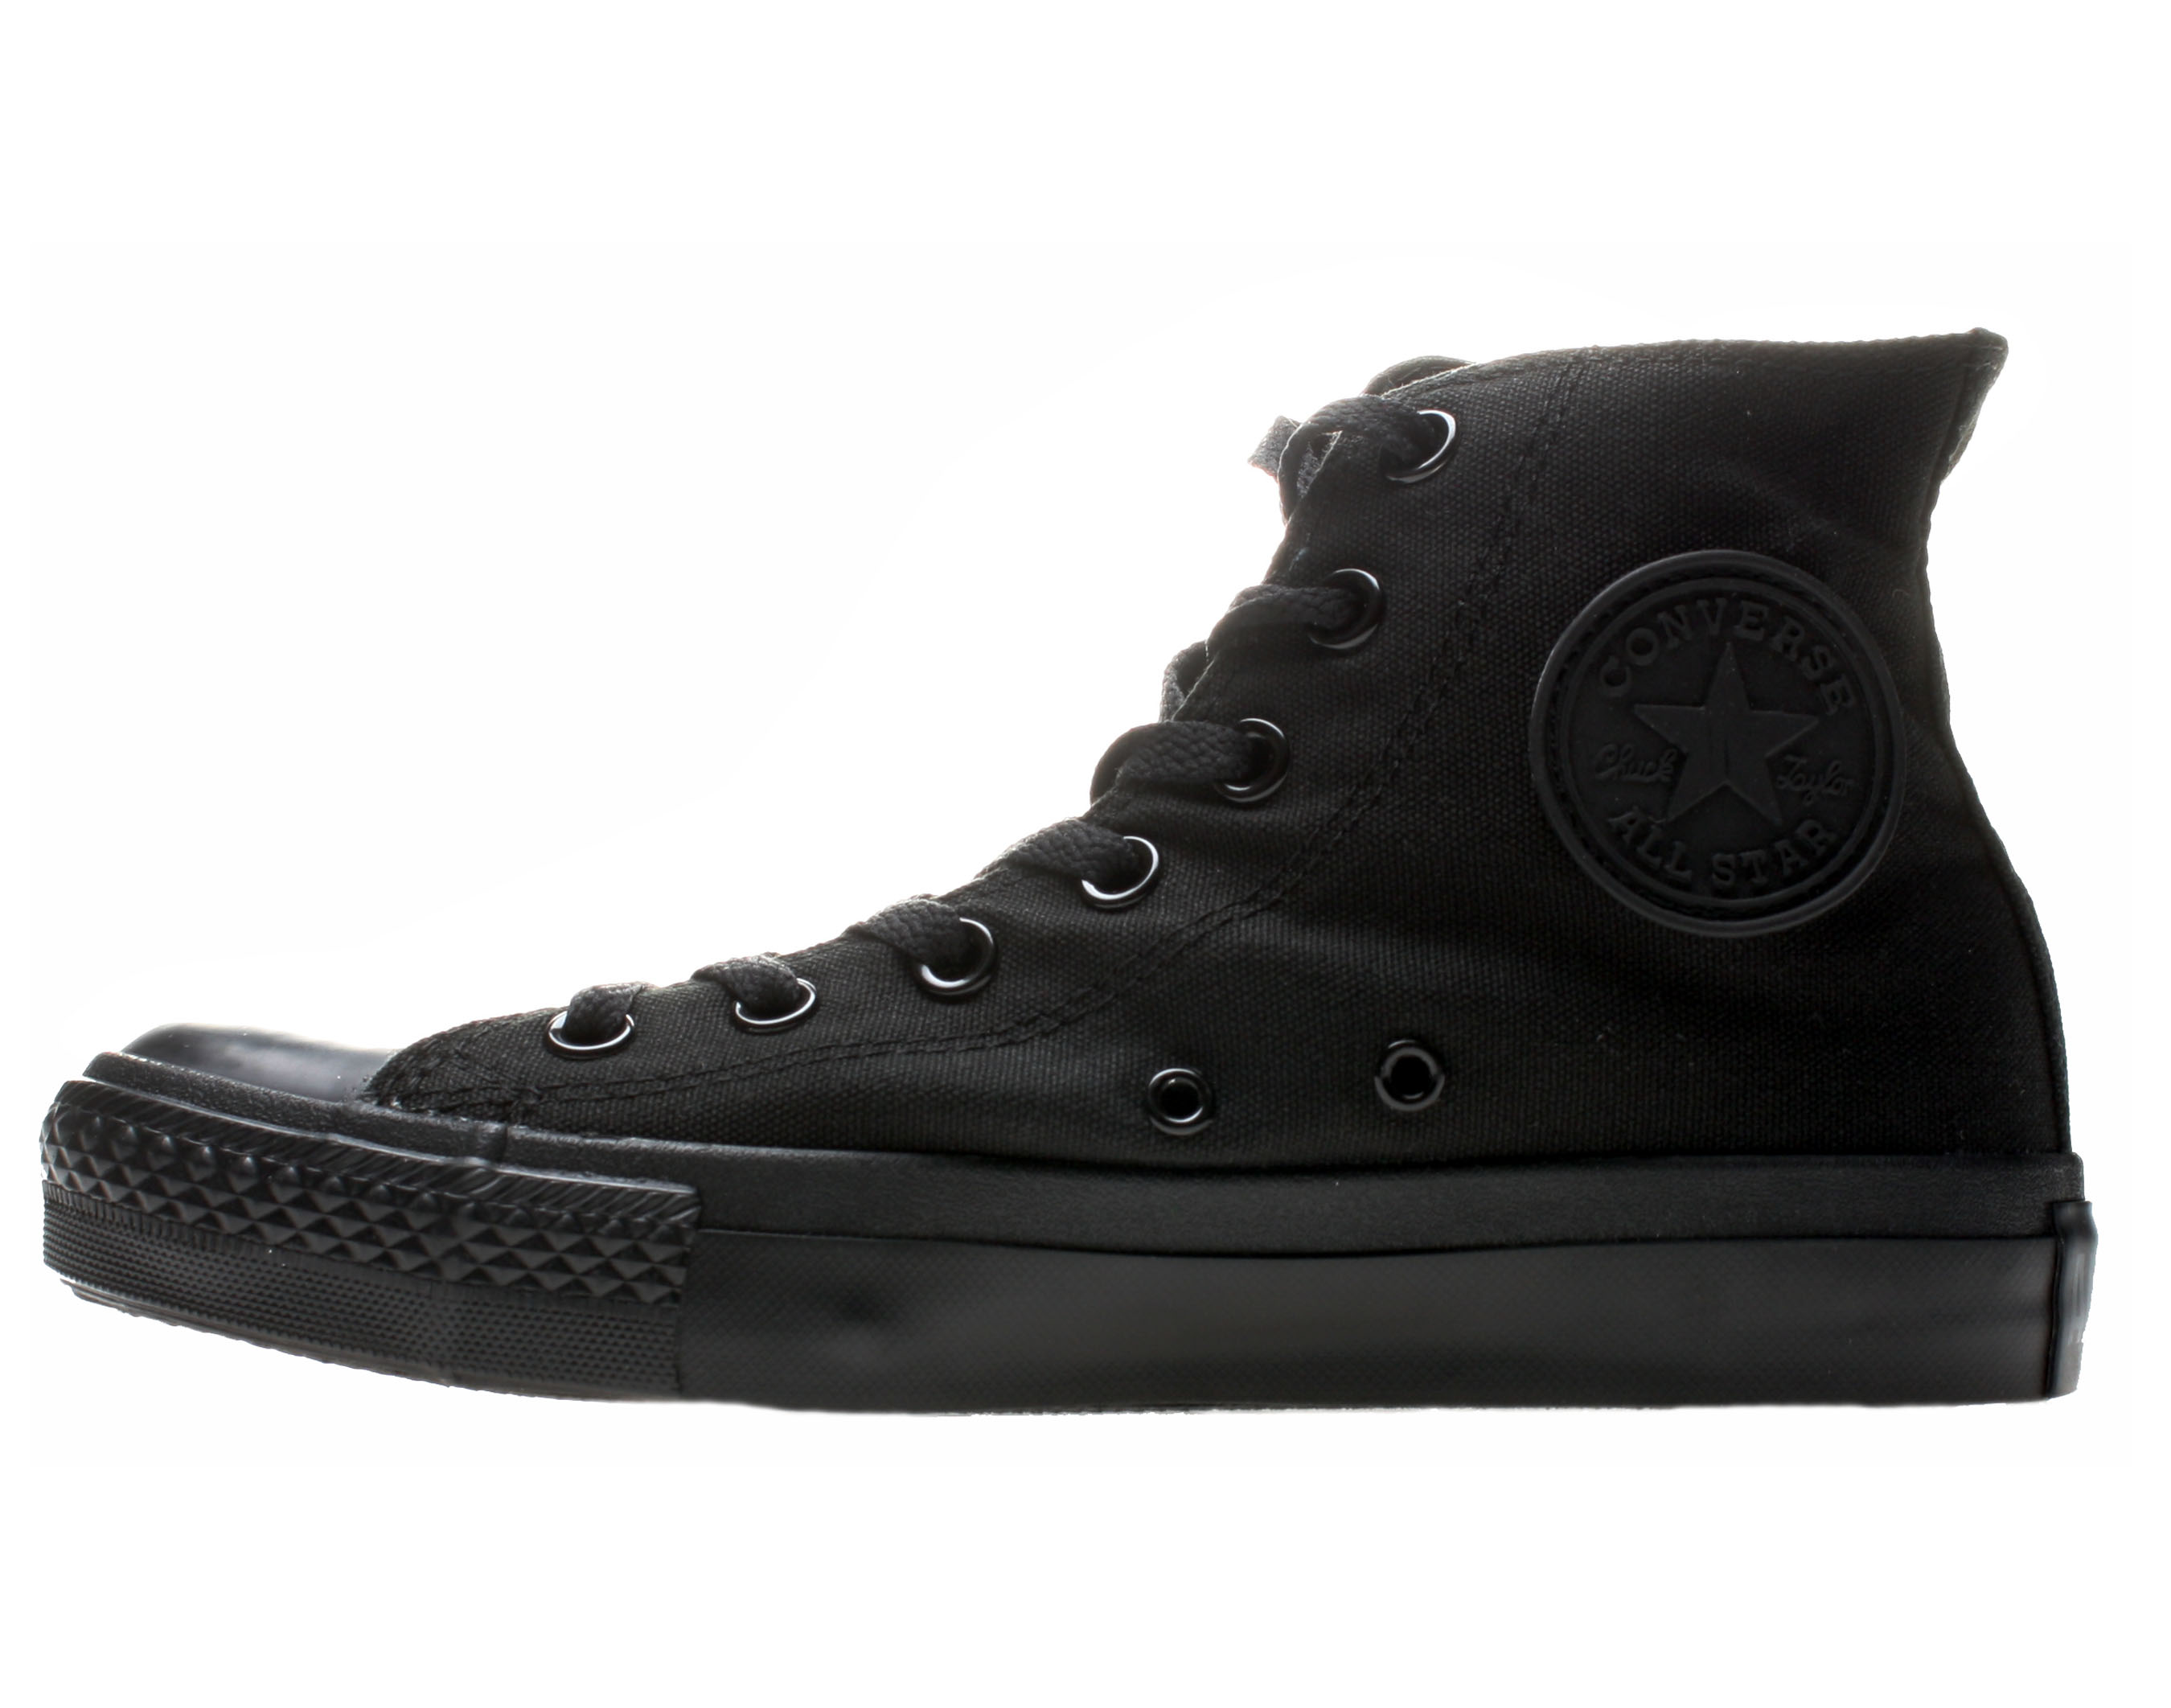 Converse Chuck Taylor All Star High Top Sneaker - image 3 of 6